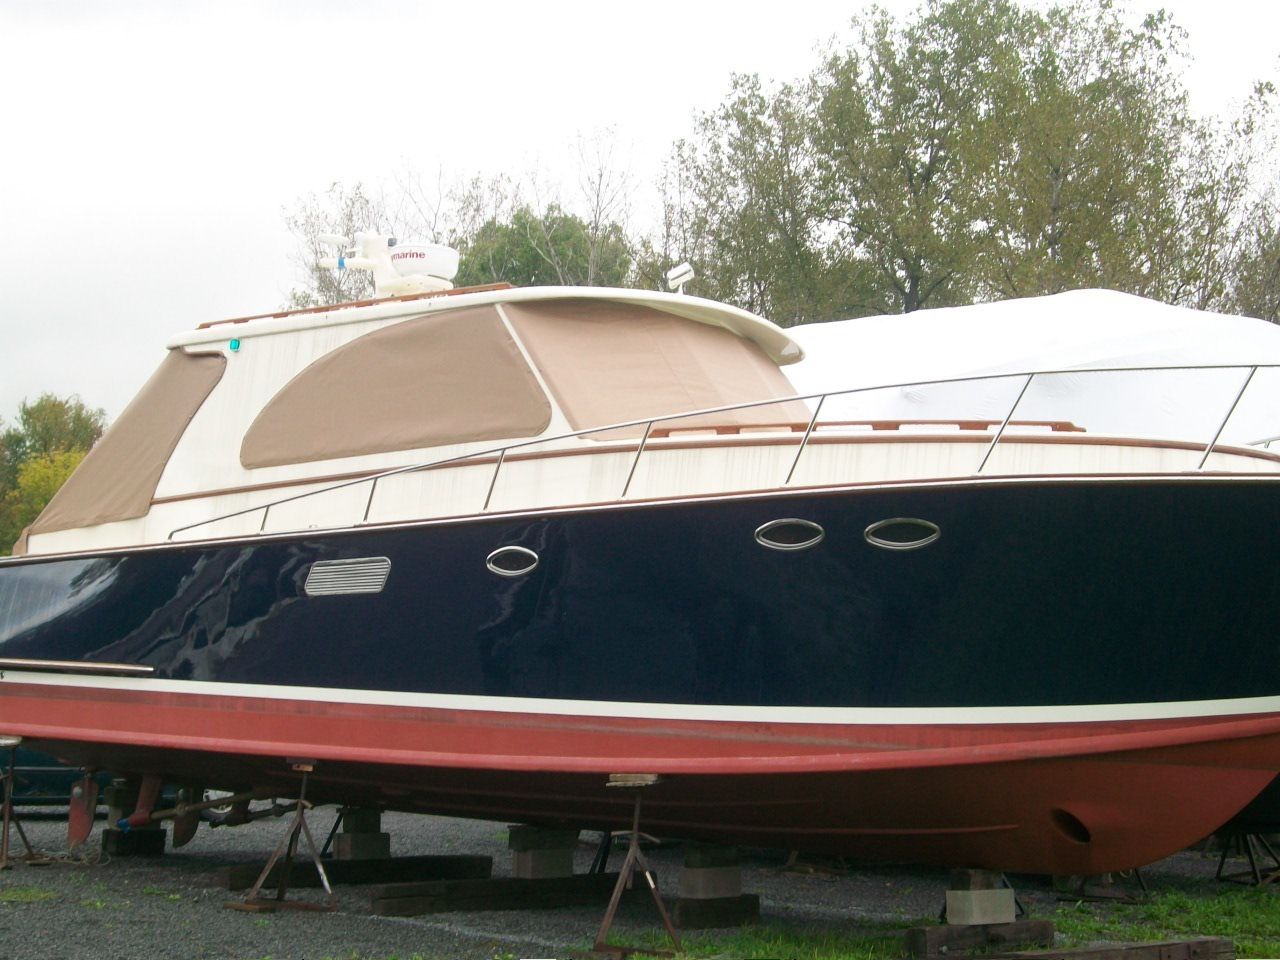 Windsor Craft boat for sale from USA